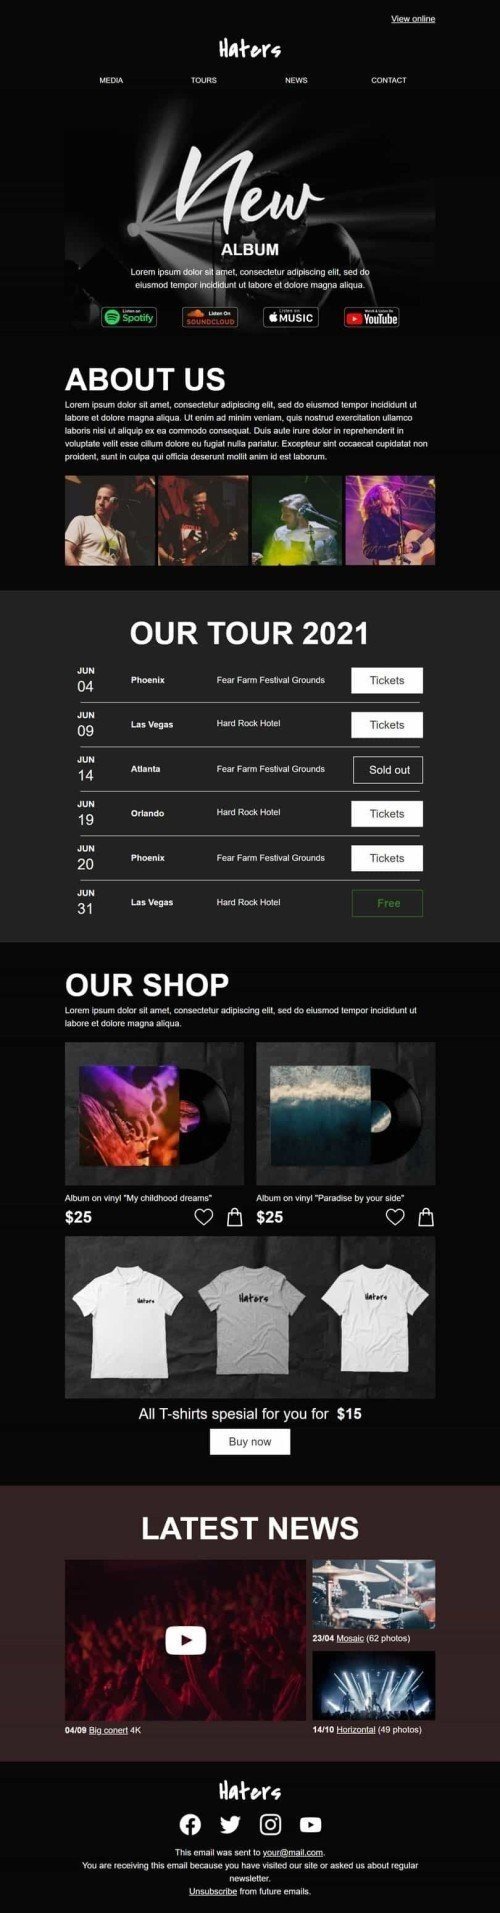 Promo Email Template «New album» for Music industry desktop view